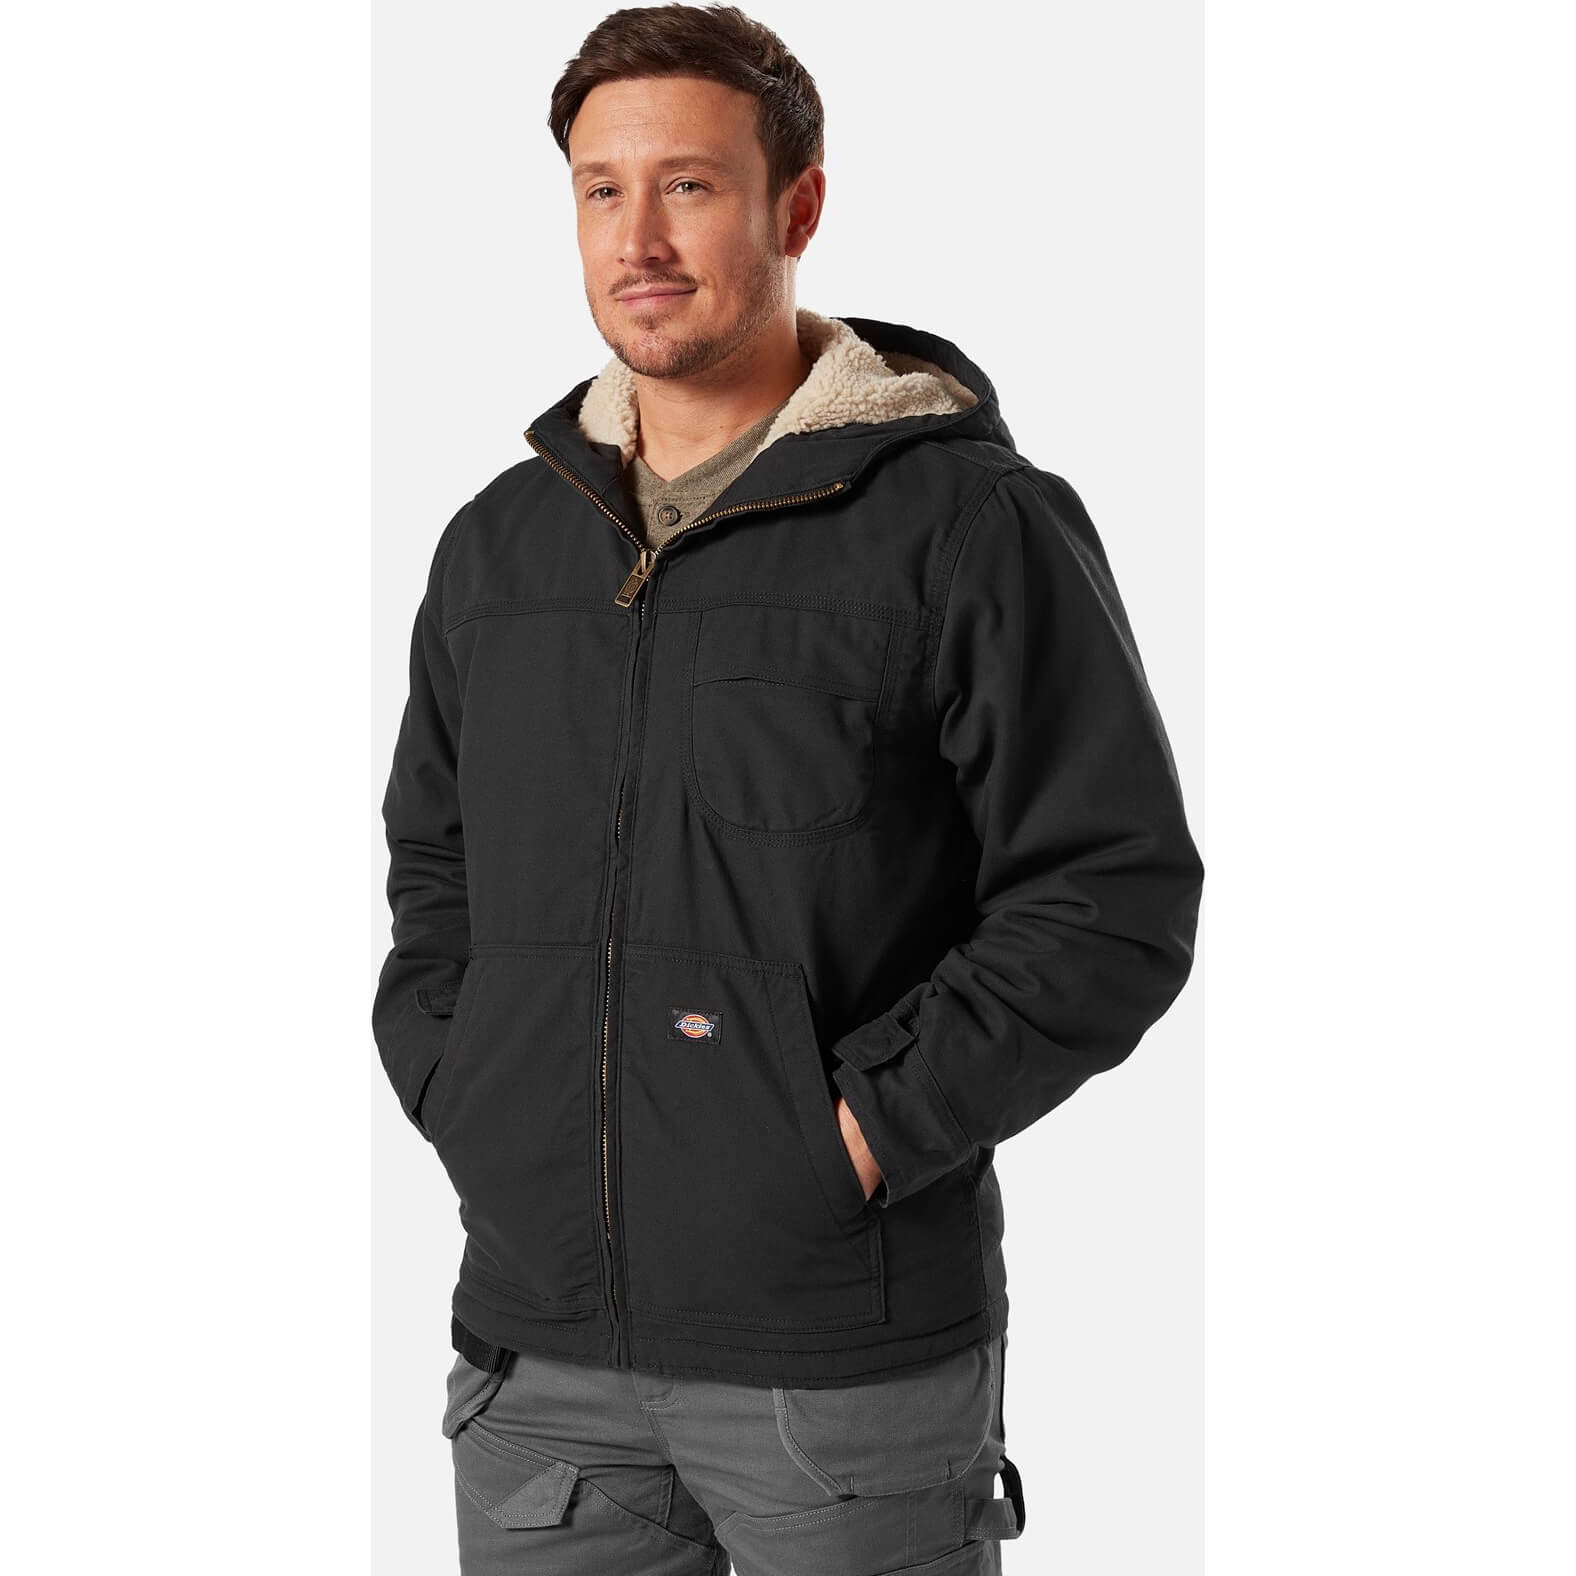 Image of Dickies Sherpa Lined Duck Jacket Black XL